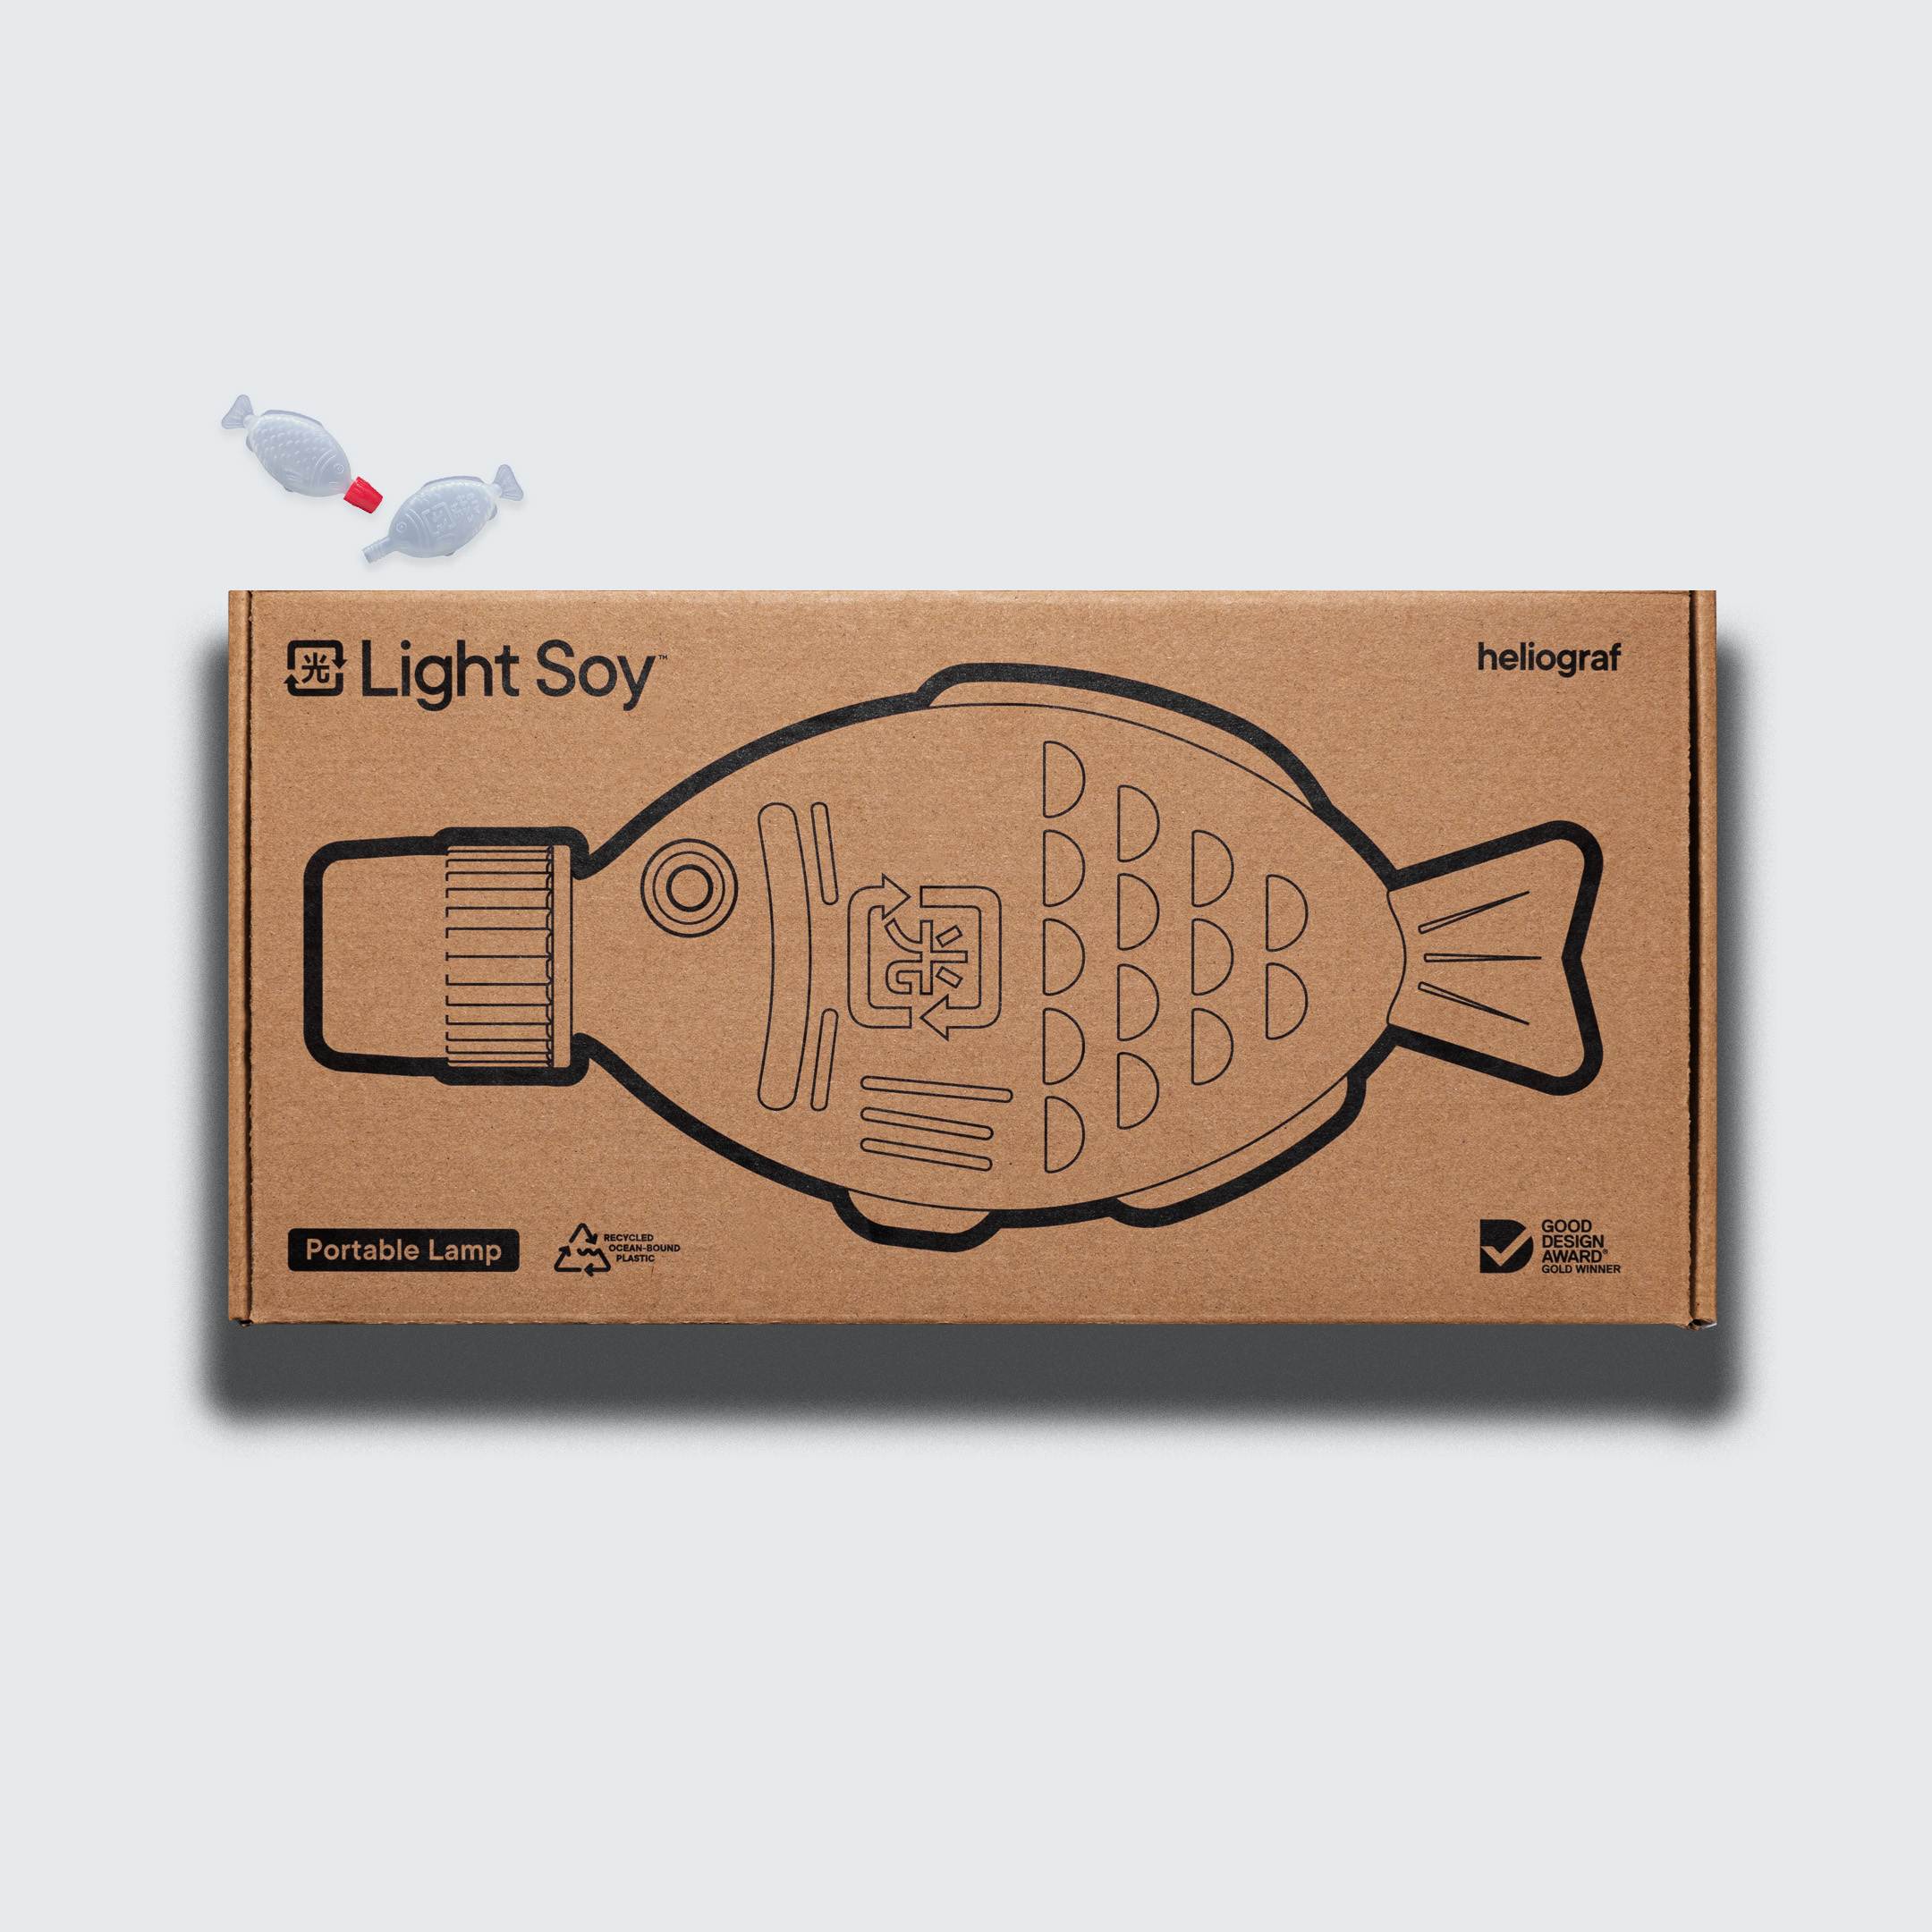 Light Soy by Heliograf showing the nice cardboard packaging the light come sin